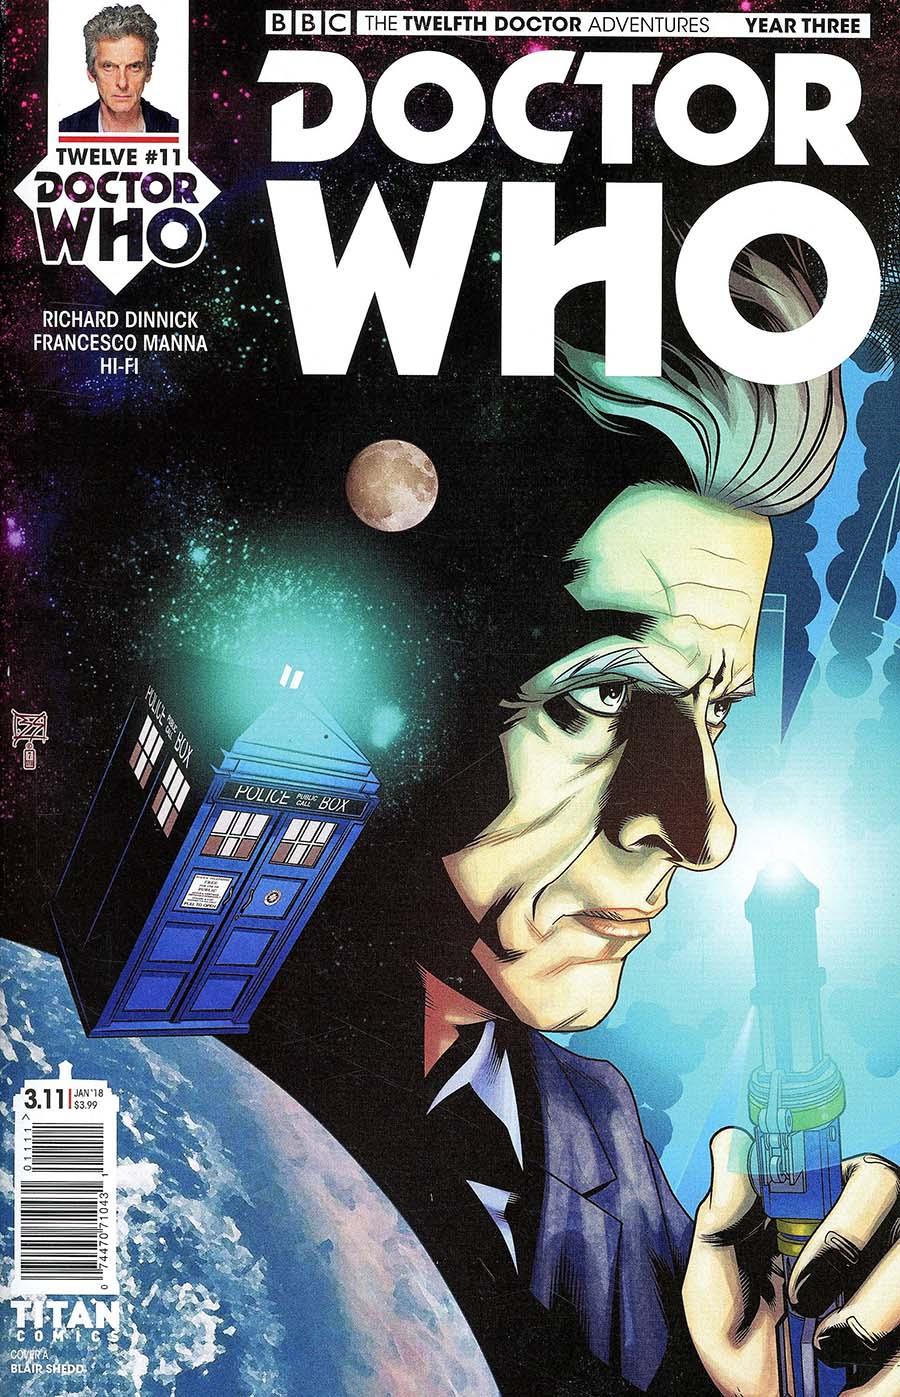 Doctor Who 12th Doctor Year Three Vol. 1 #11